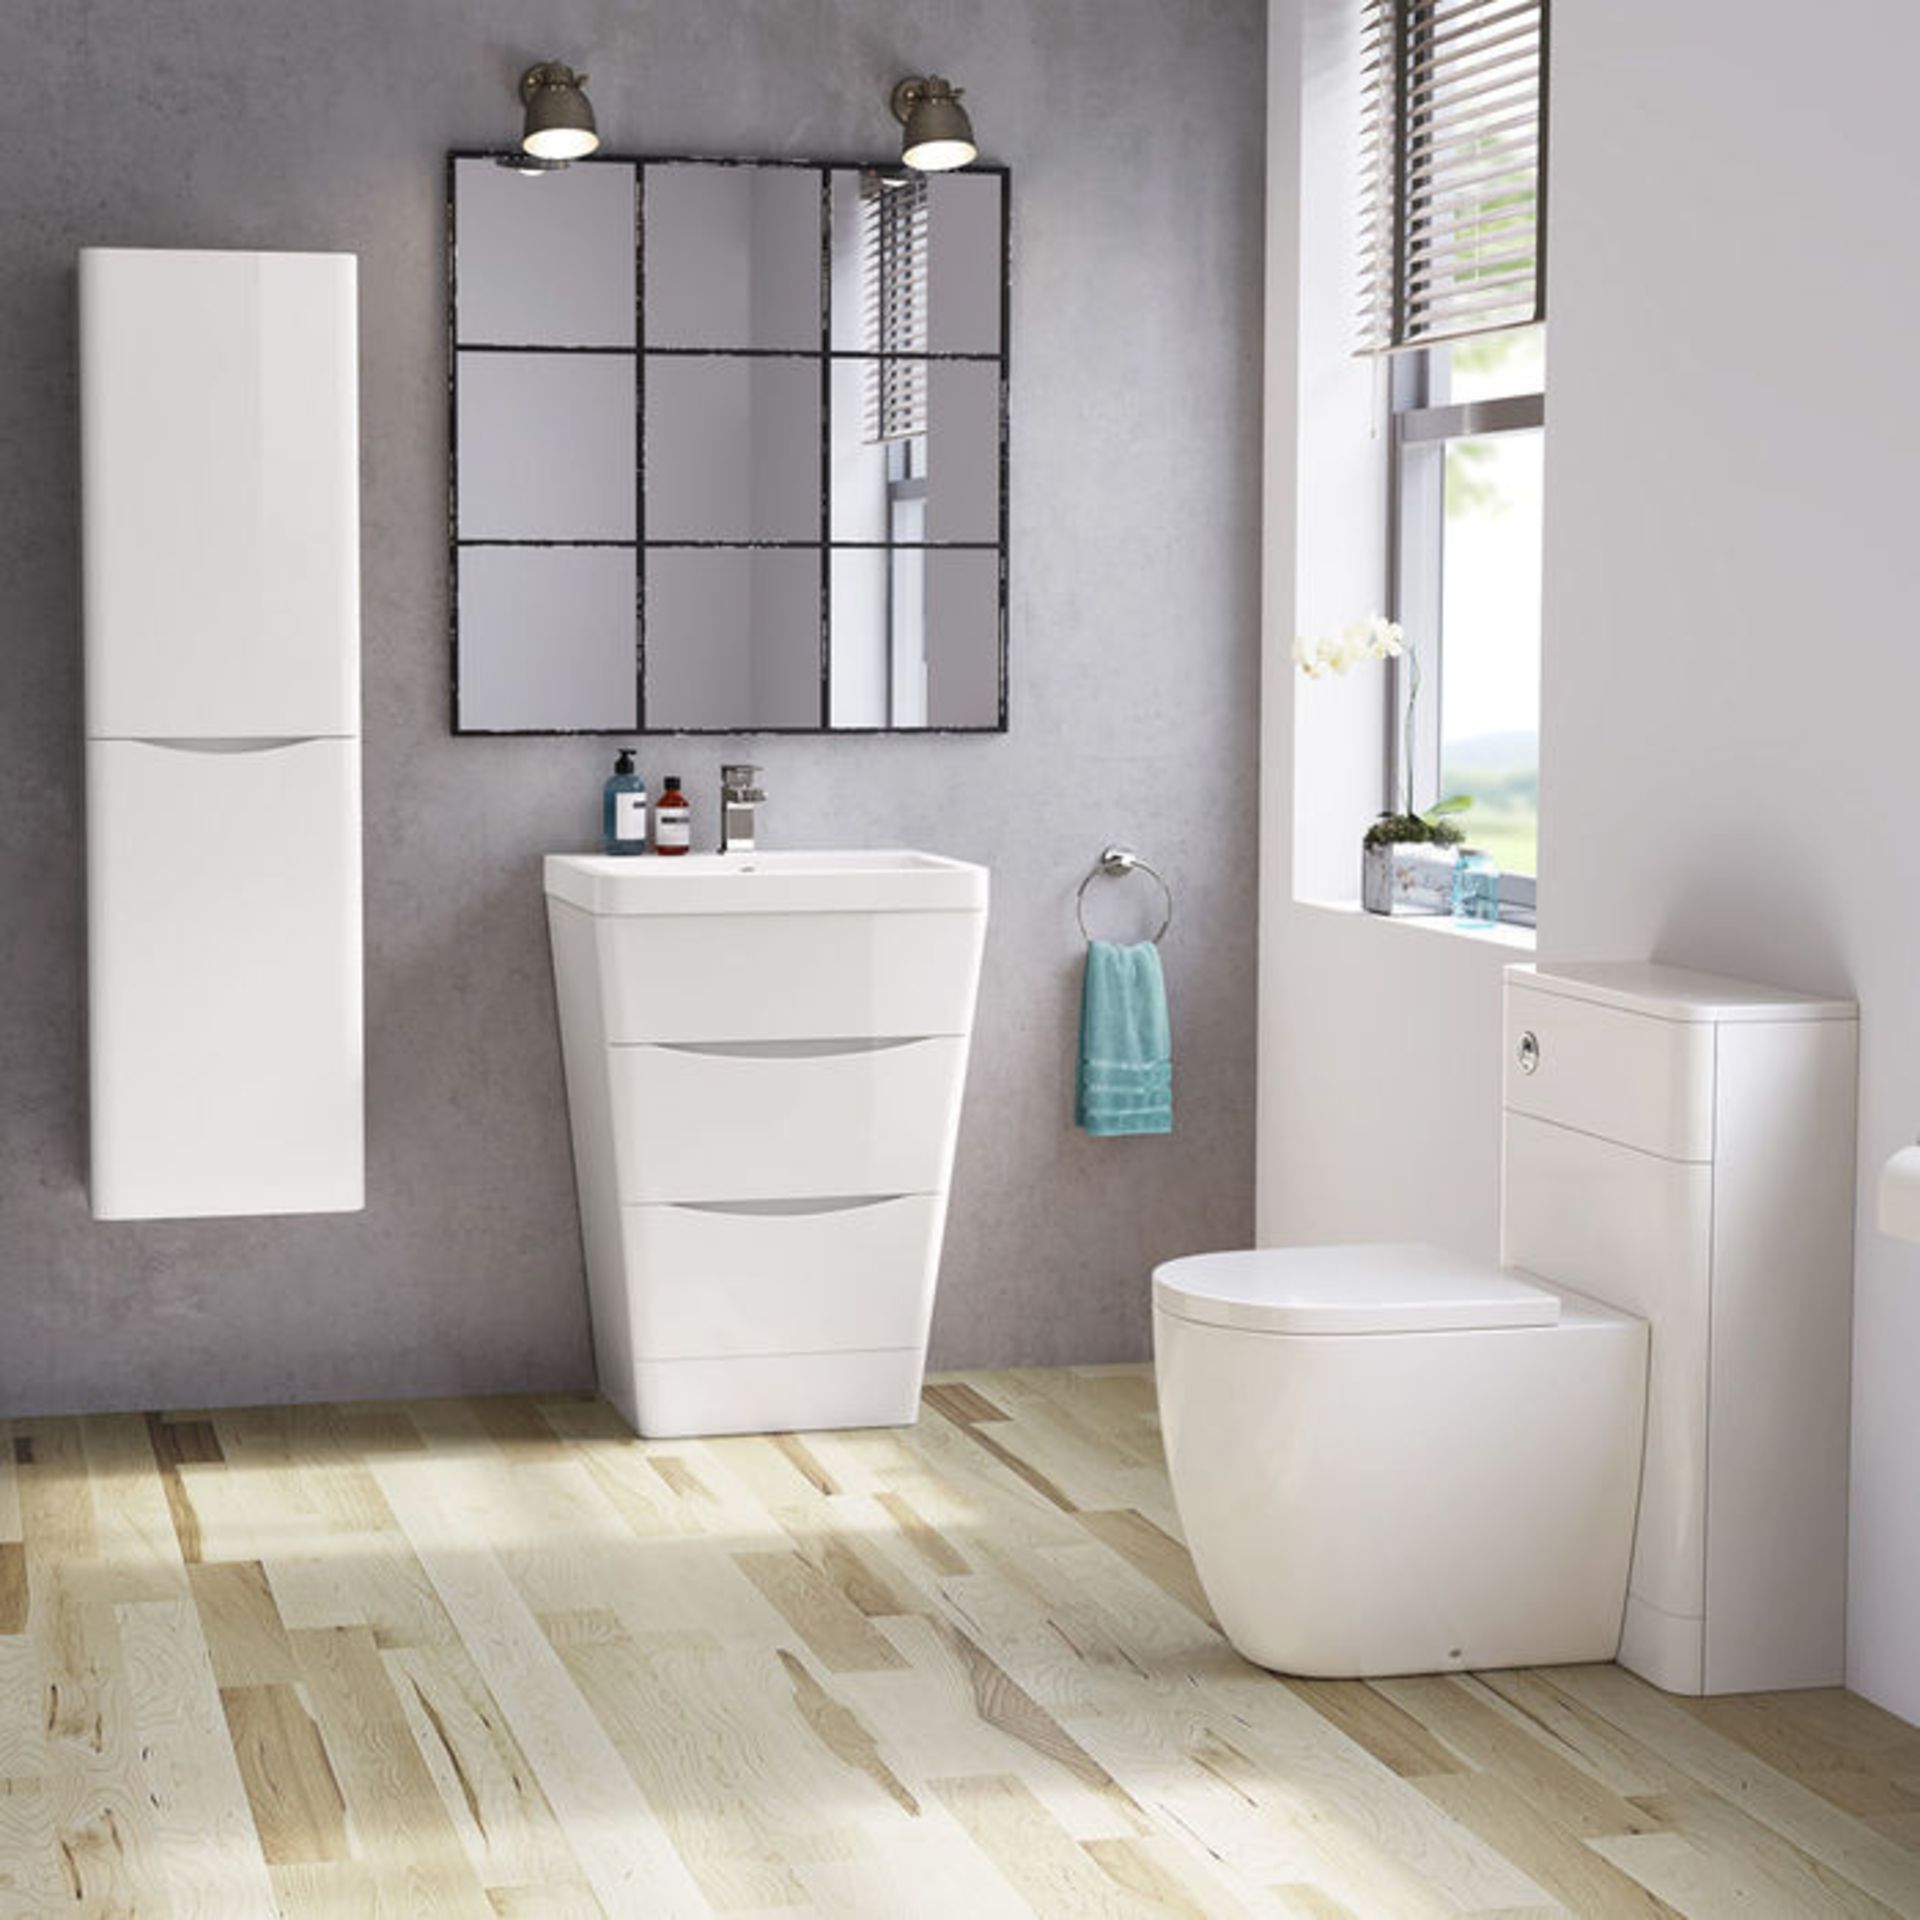 NEW & BOXED 600mm Austin II Gloss White Built In Basin Drawer Unit - Floor Standing. RRP £799... - Image 2 of 3